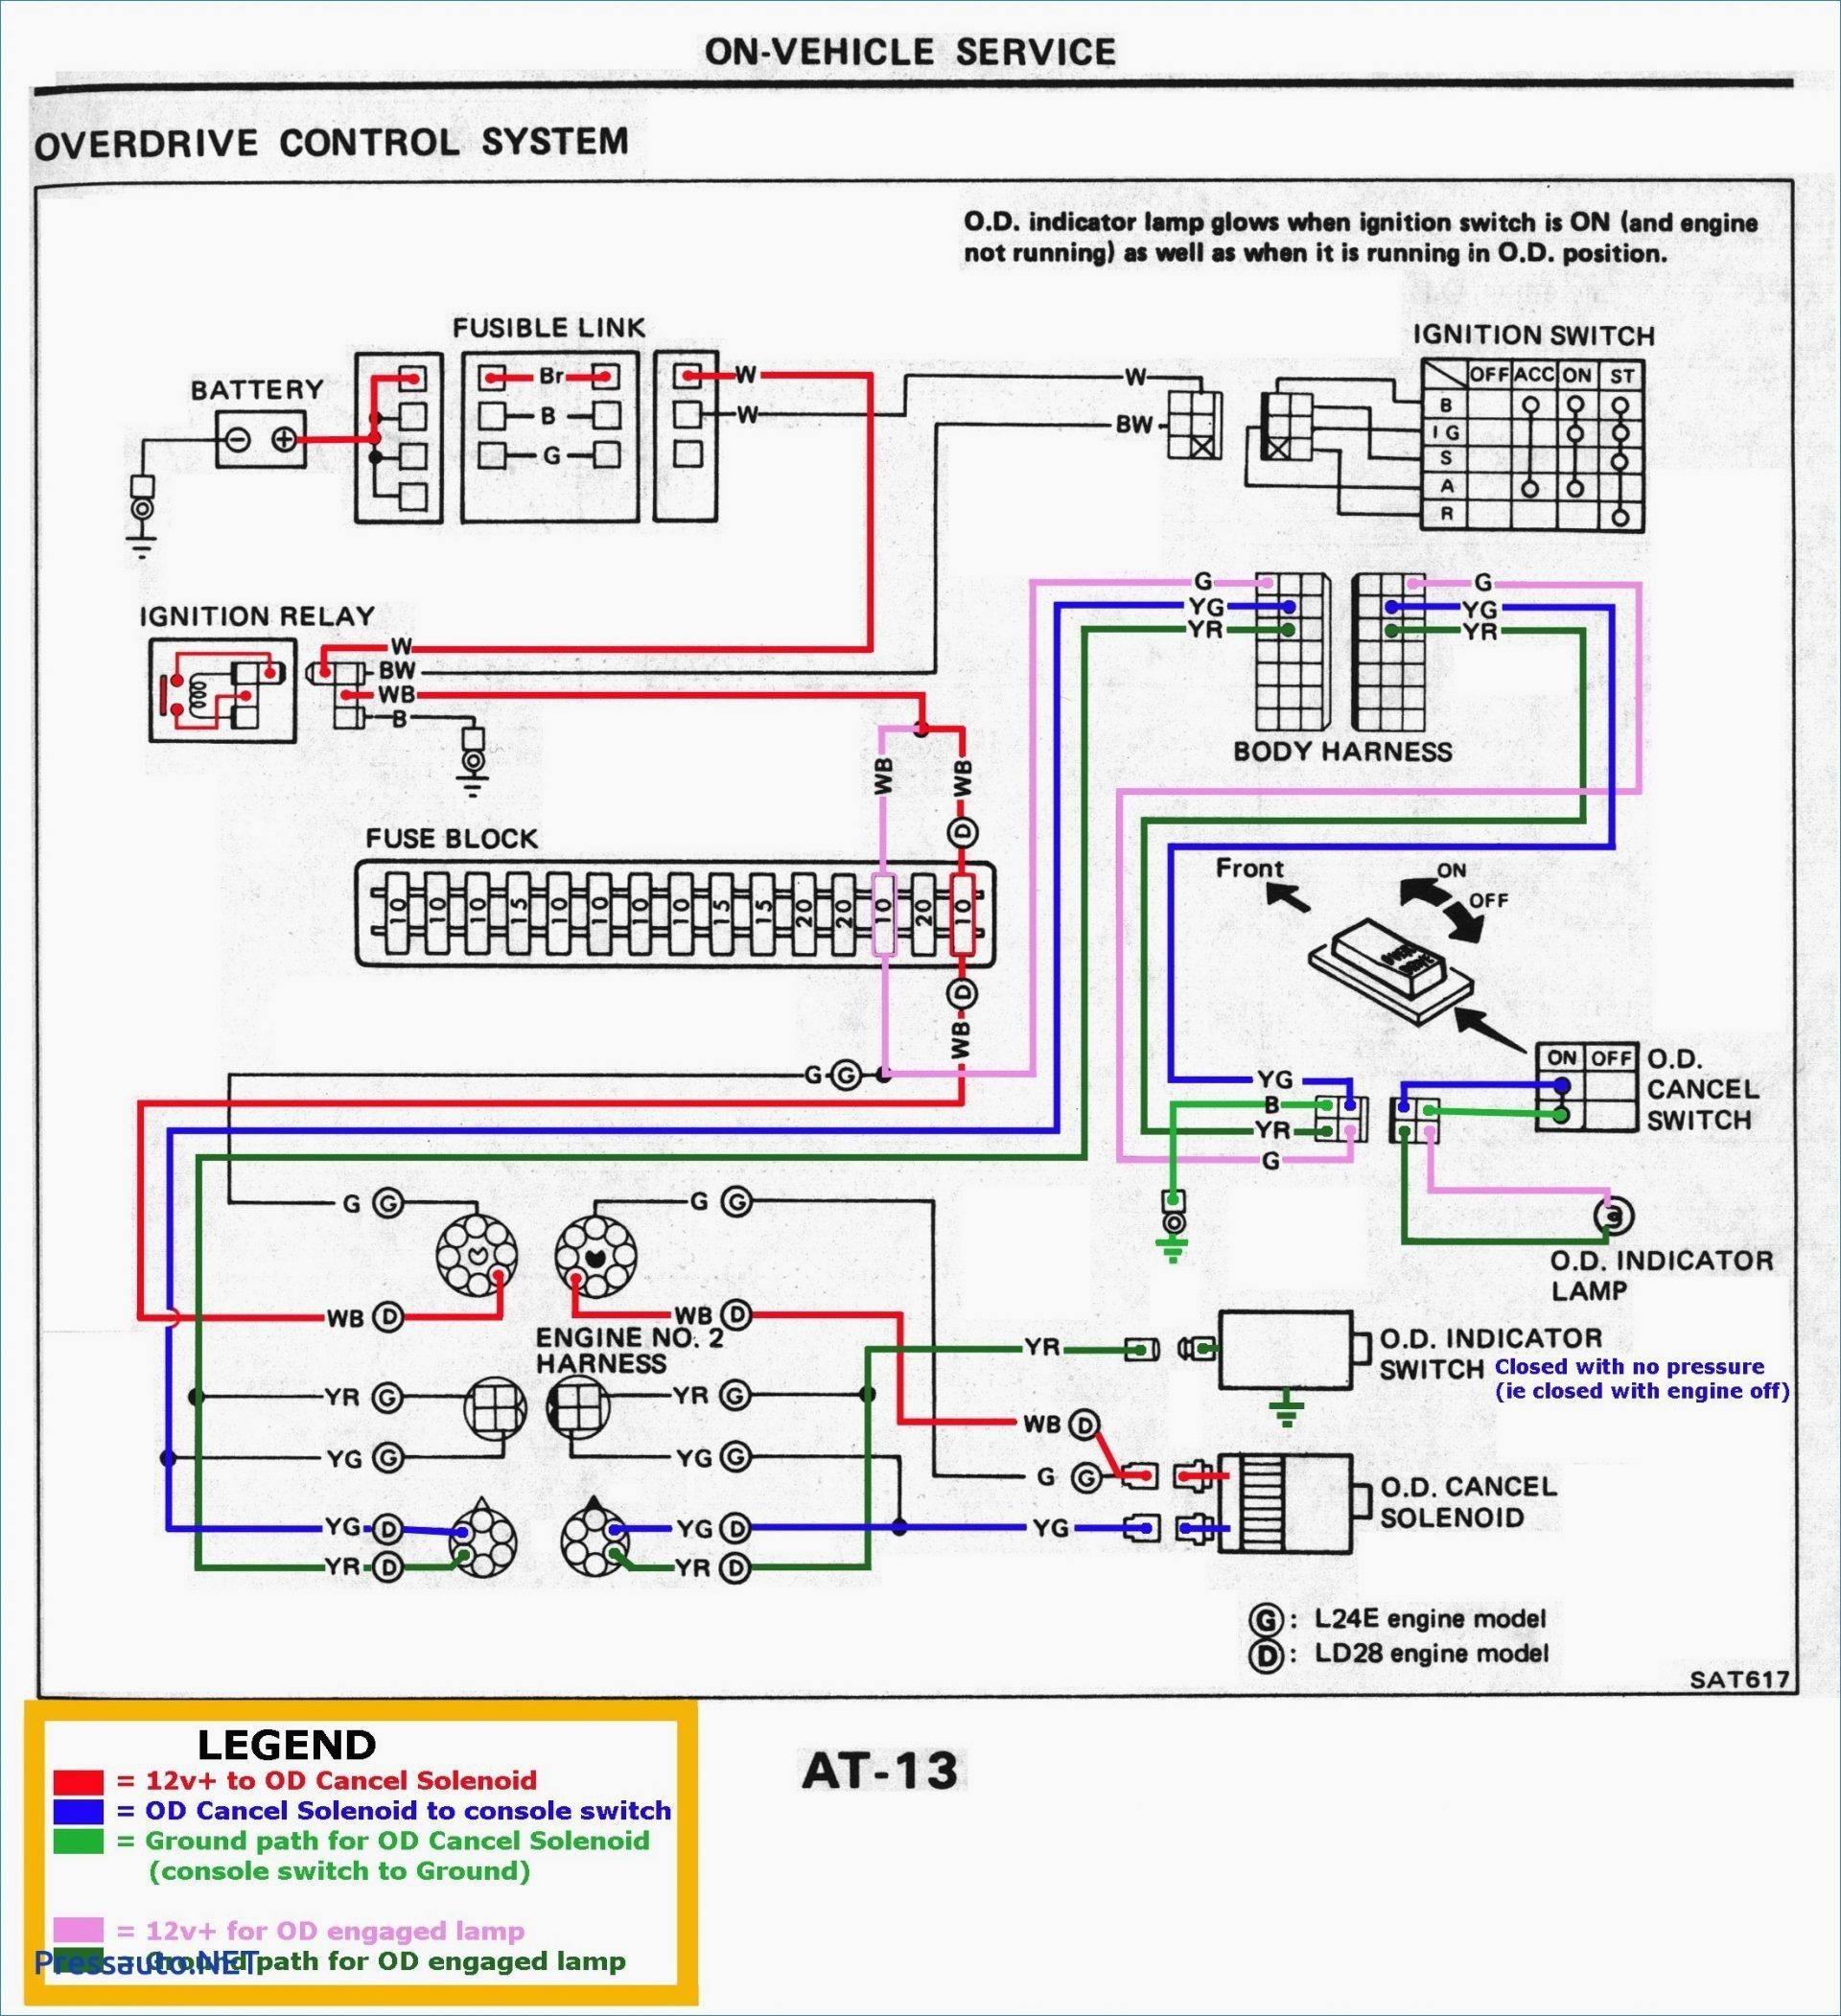 Ignition Switch Wiring Diagram 2001 Blazer Best Wiring Diagram For Rear Trailer Lights Save 2003 S10 Tail Lights